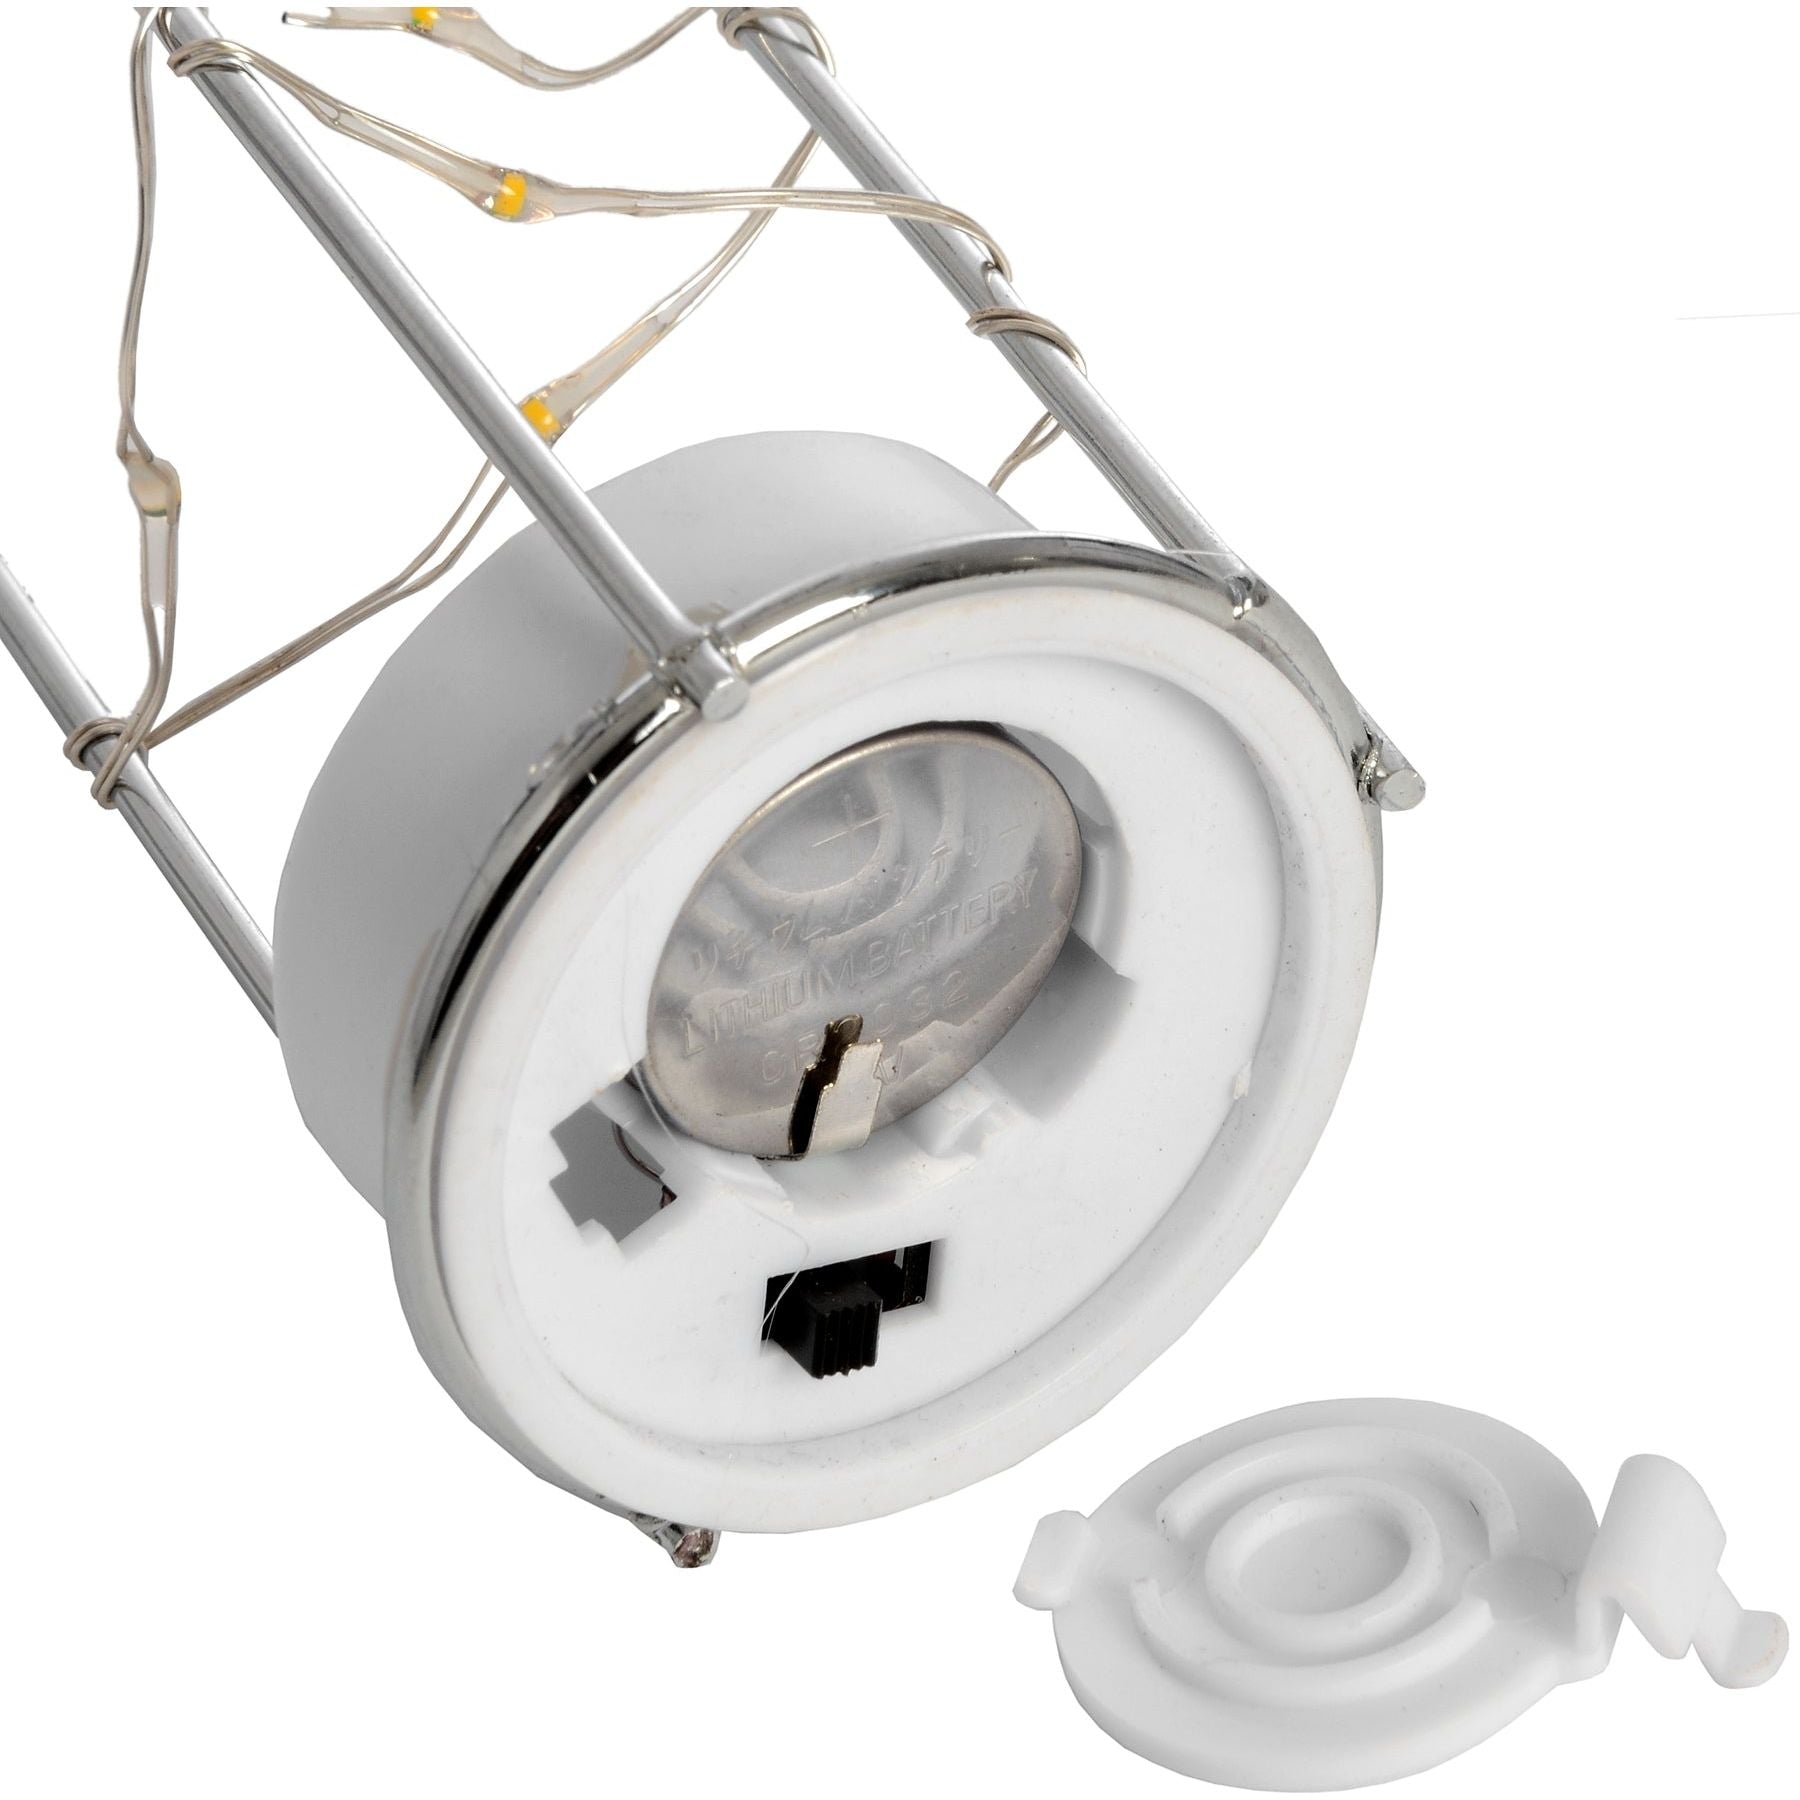 Frosted Glass Lantern with Rope Detail and Interior LED - Ashton and Finch